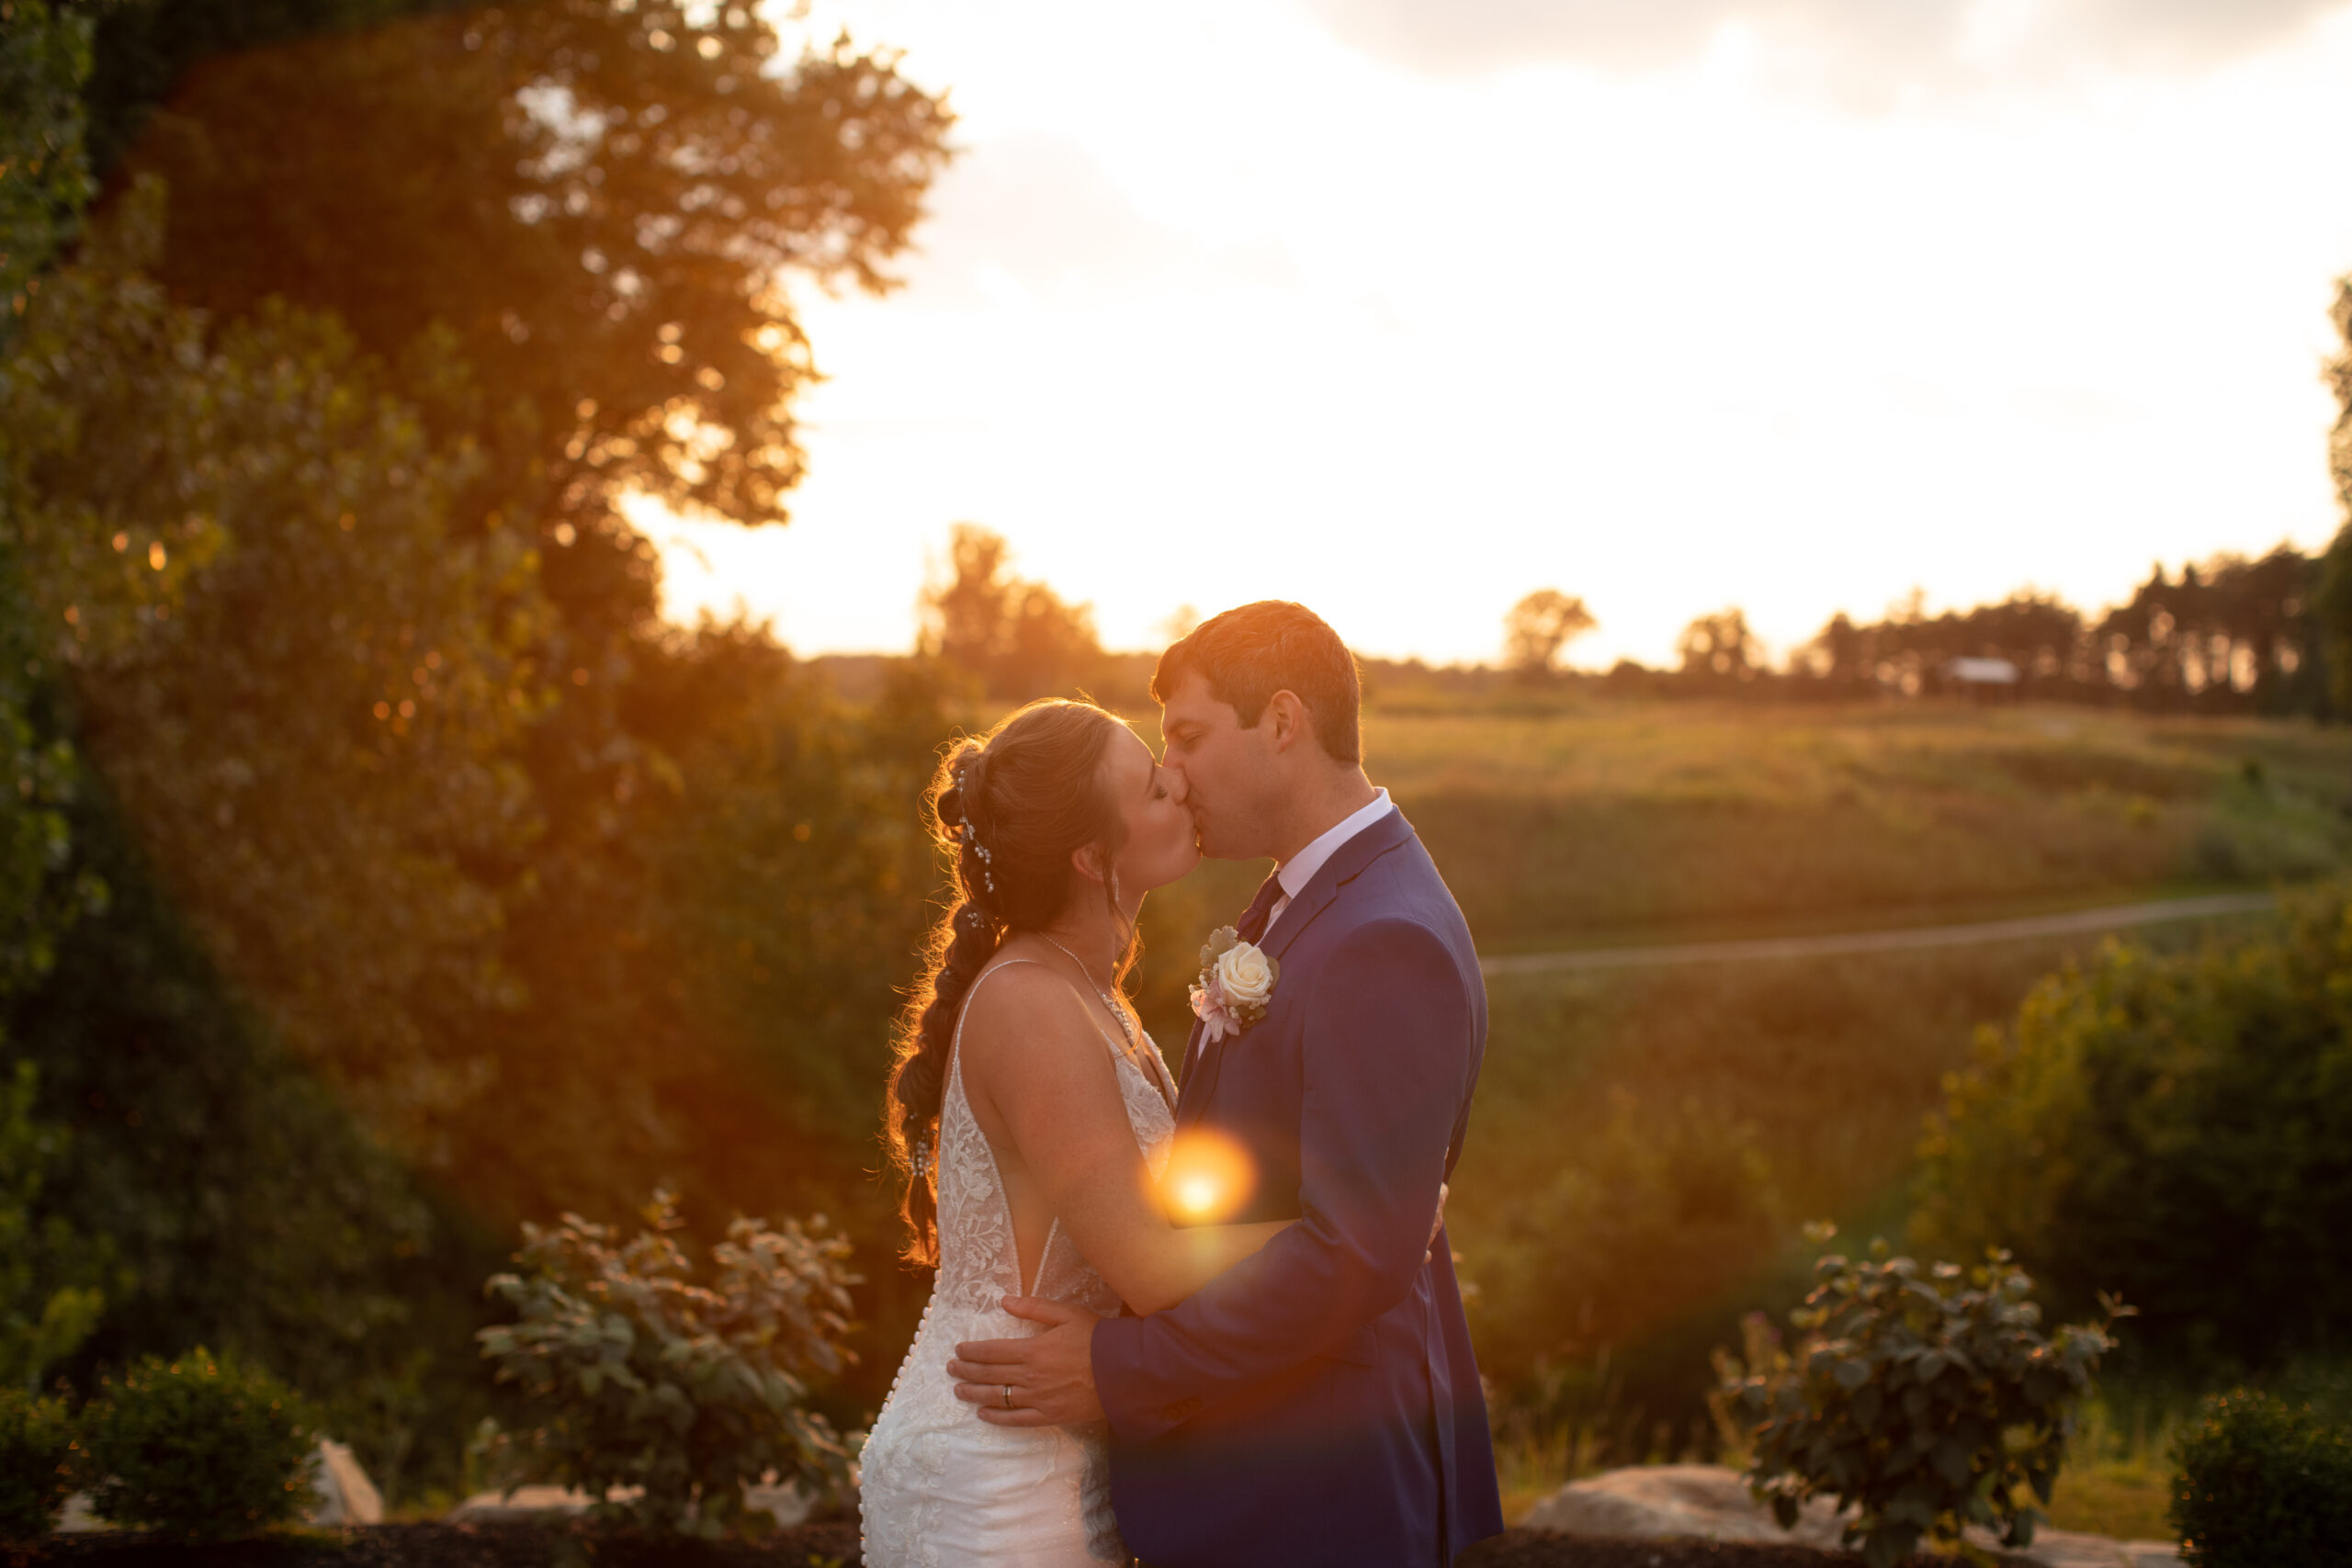 Bride and groom kissing each other and at sunset on their wedding day. Photo taken by Cincinnati Wedding photographer Aaron Aldhizer